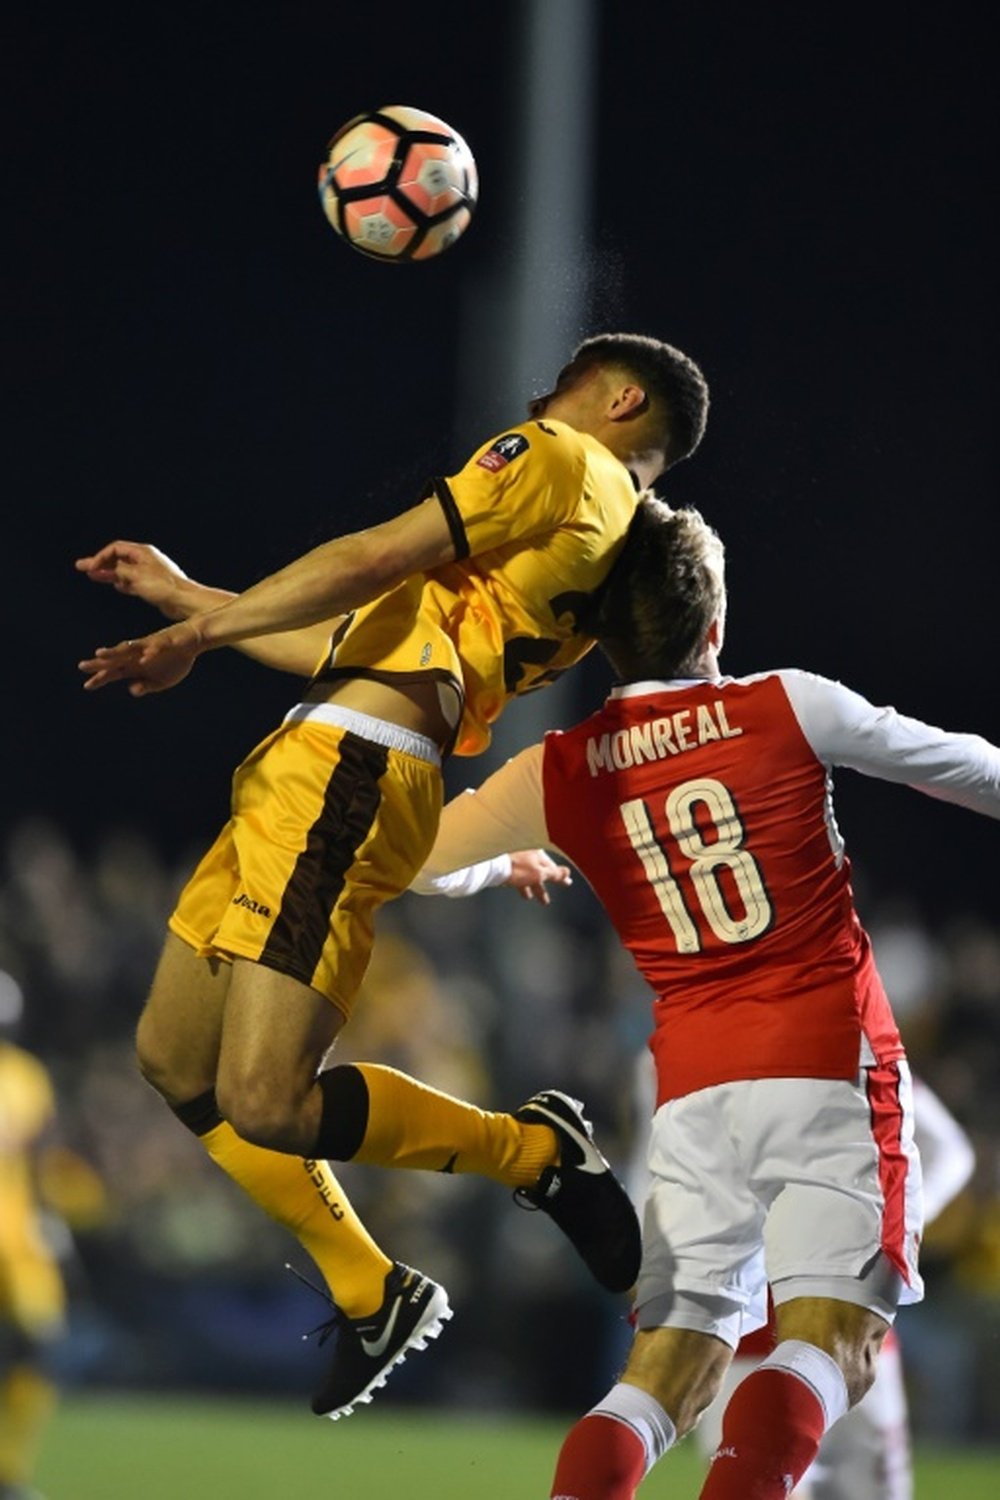 Sutton United's striker Maxime Biamou (L) vies with Arsenal's defender Nacho Monreal. AFP